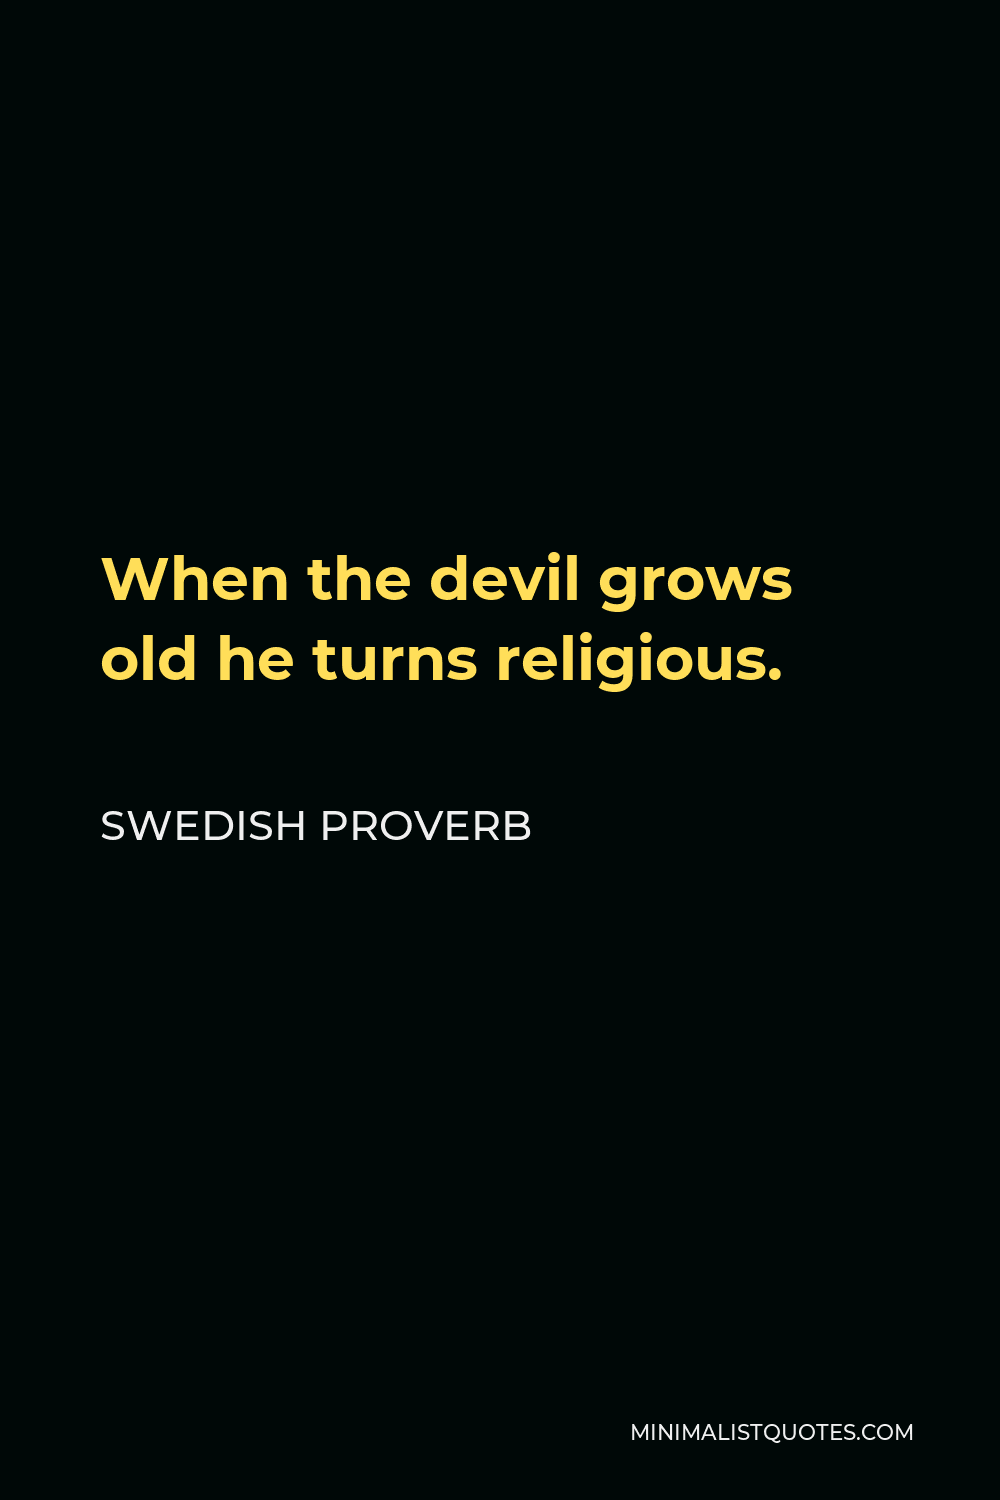 Swedish Proverb Quote - When the devil grows old he turns religious.